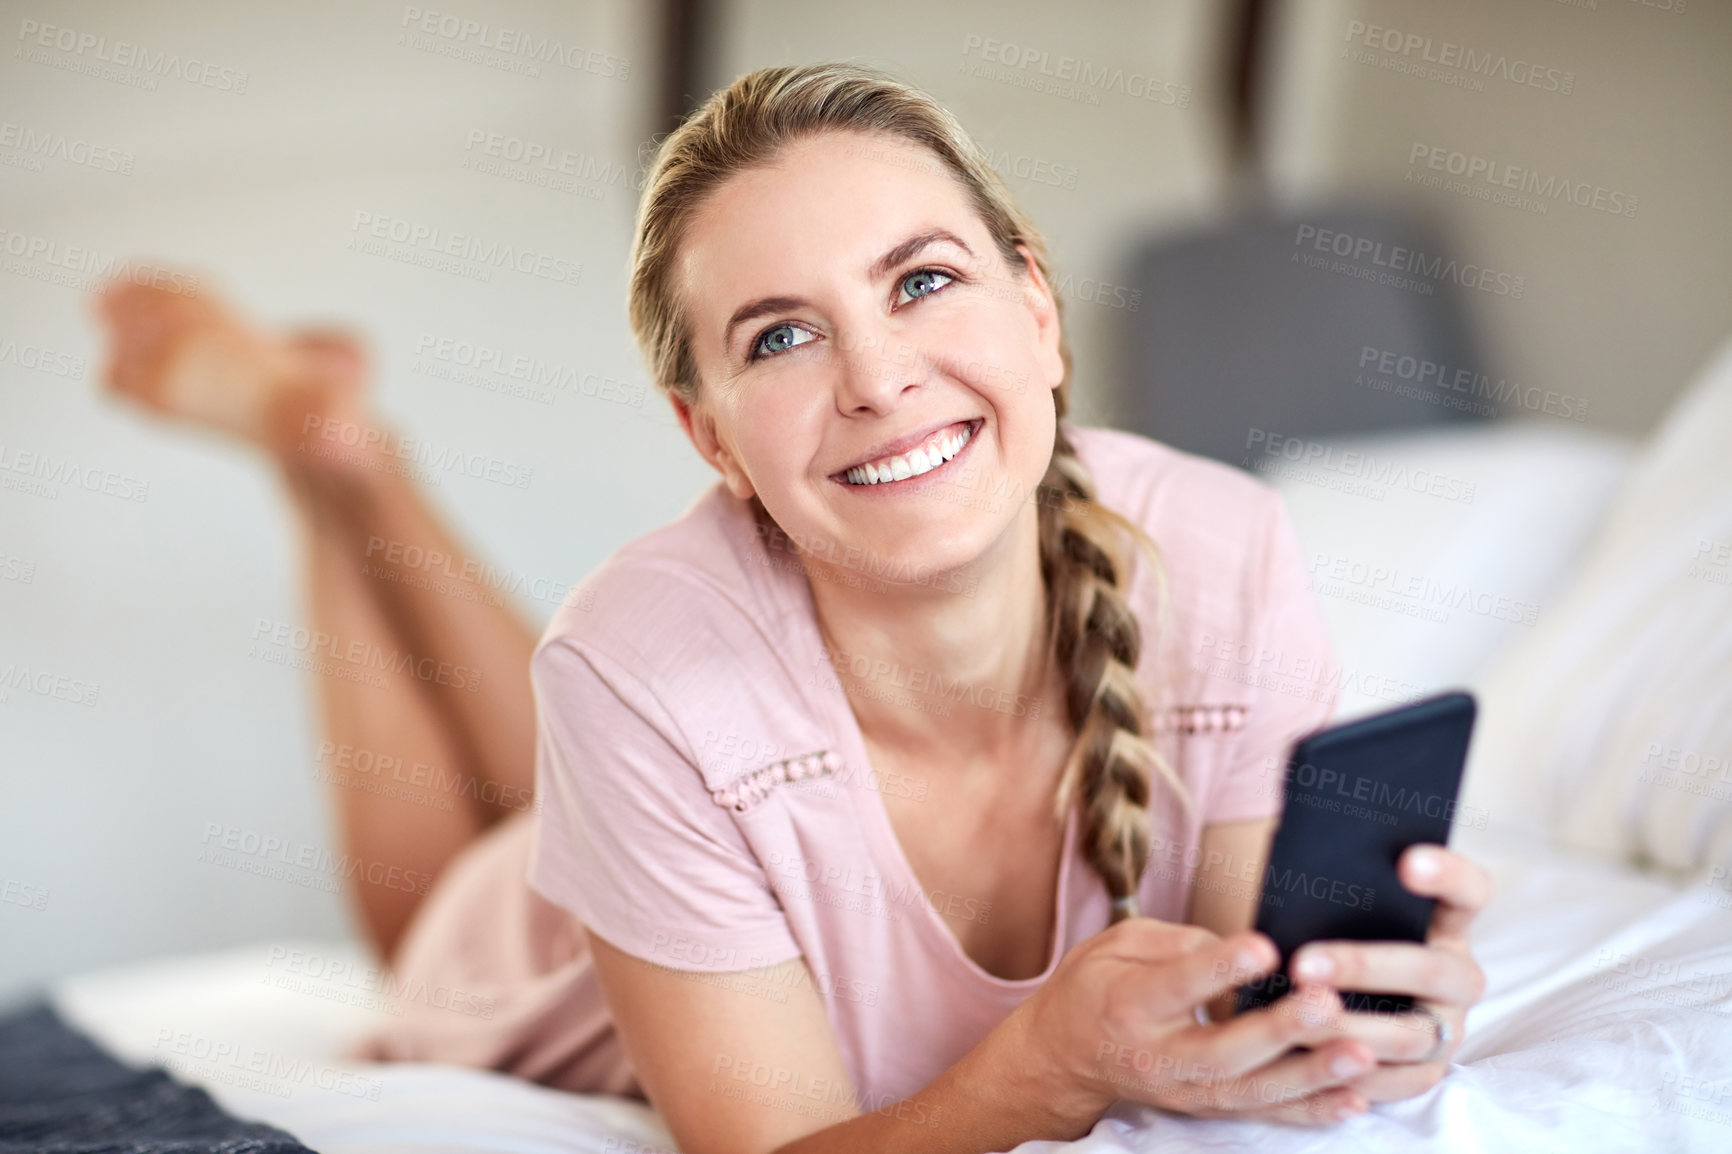 Buy stock photo Shot of an attractive young woman using her cellphone while lying on her bed in her bedroom at home